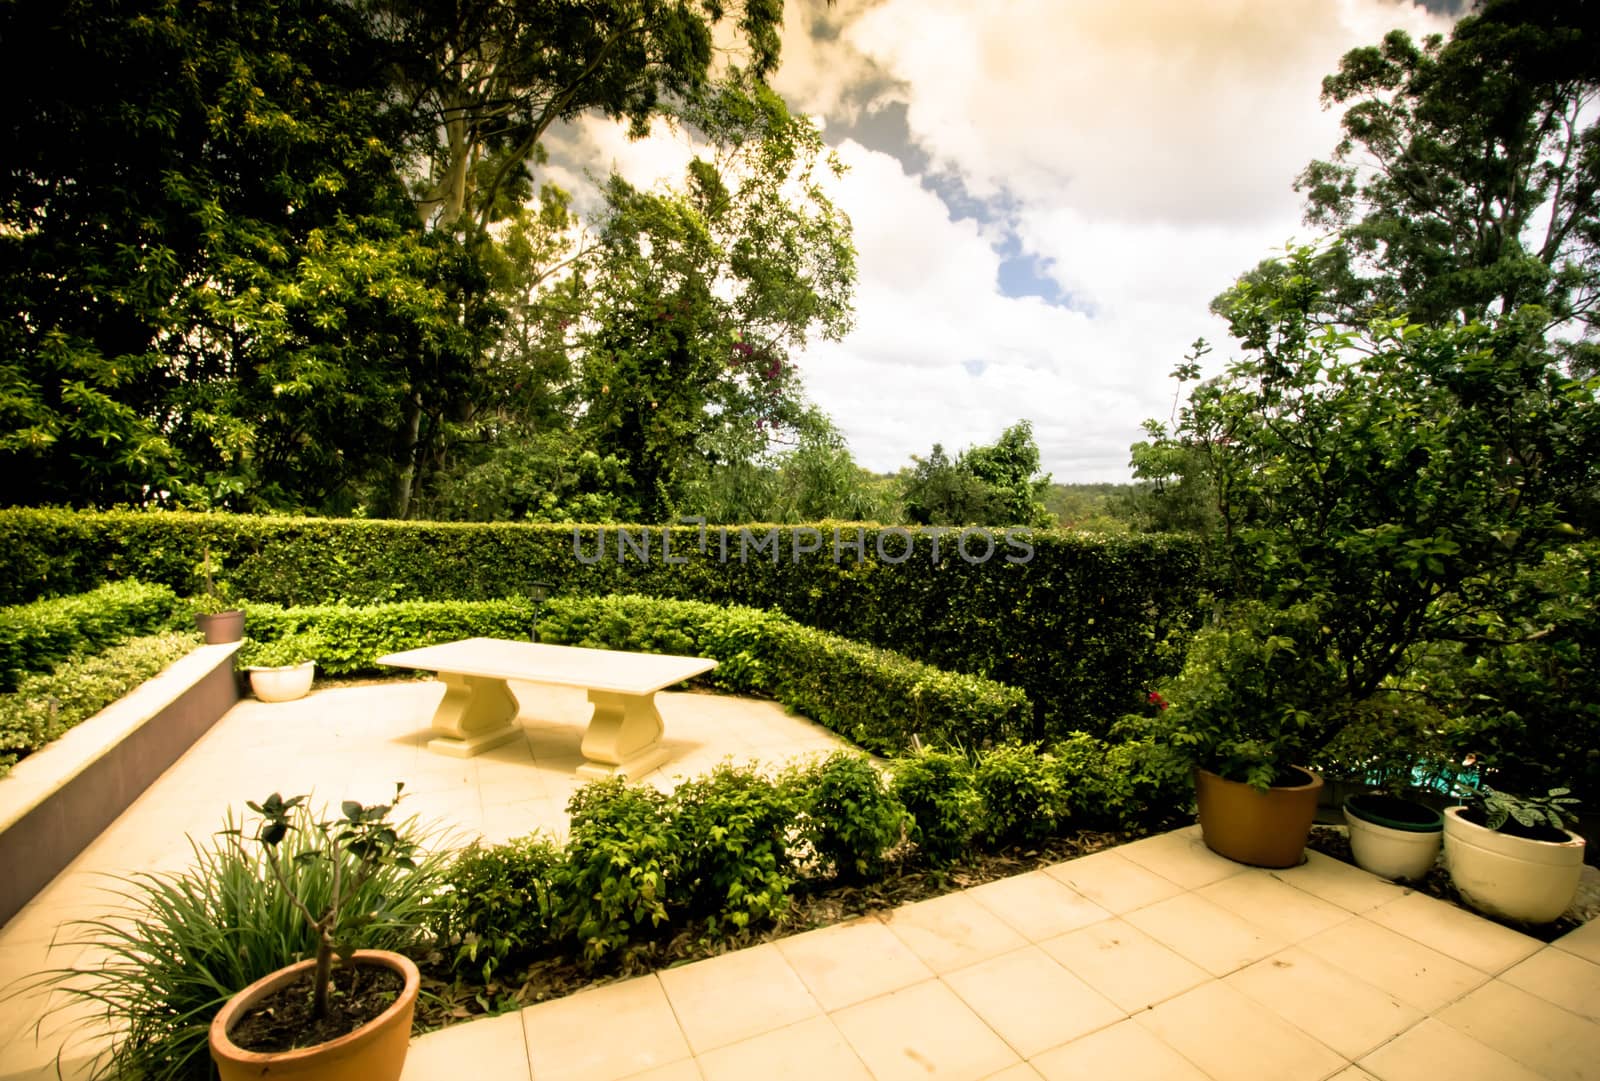 Outdoor garden terraces with a stone bench in a landscaped garden with formal trimmed hedges